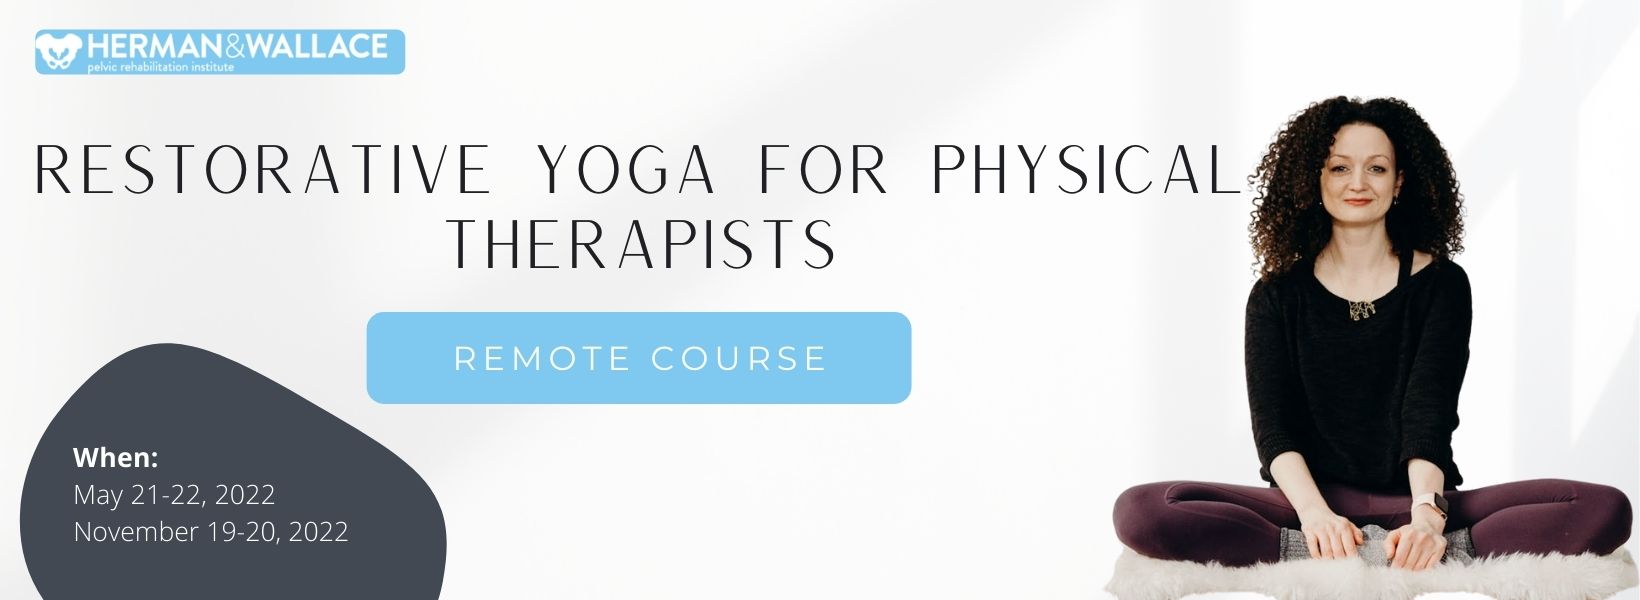 Restorative Yoga for Physical Therapists